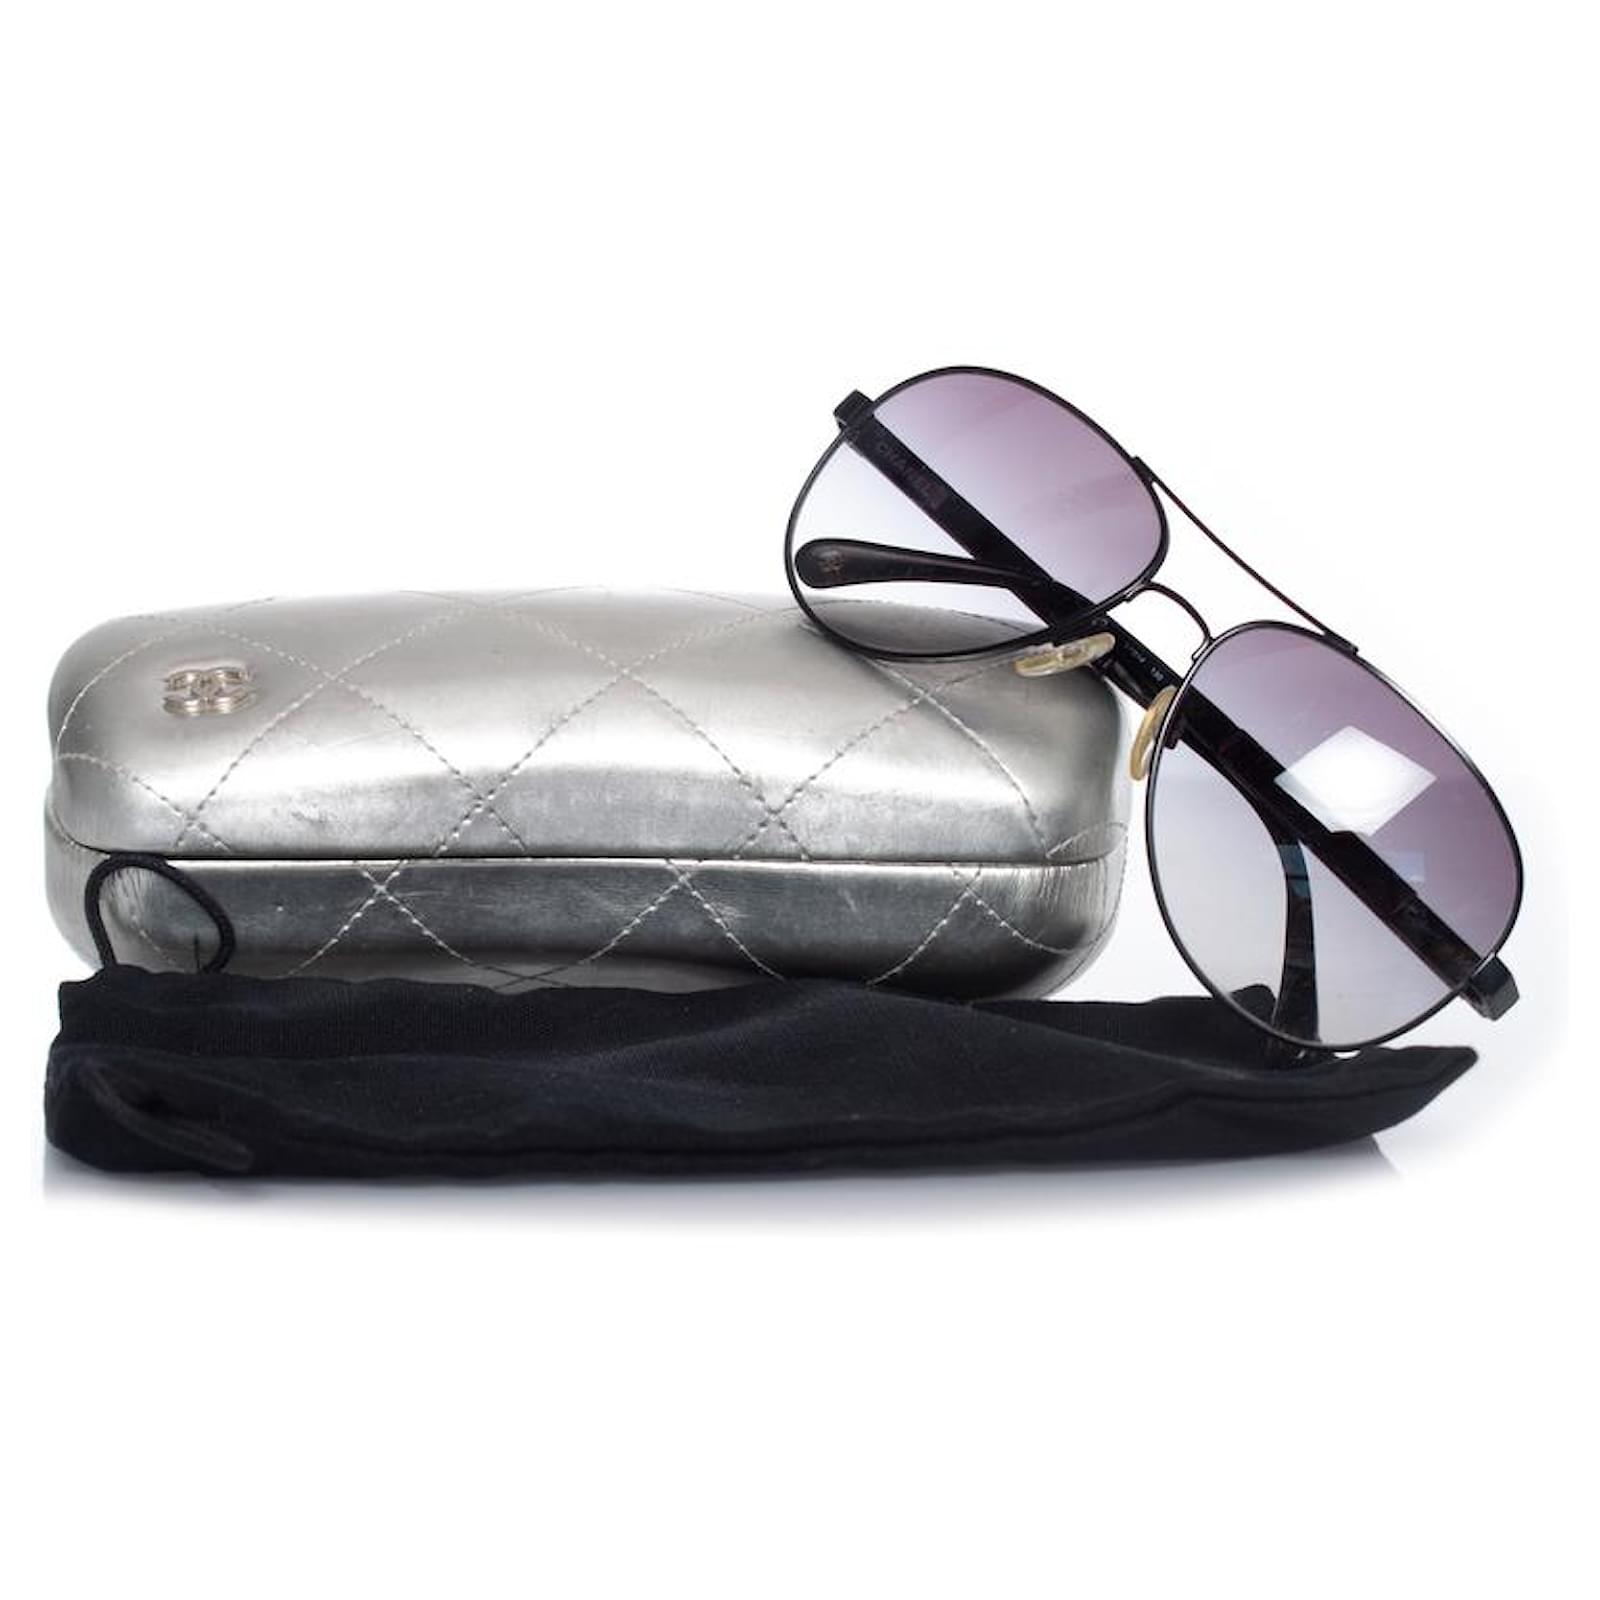 chanel aviator sunglasses with leather sides